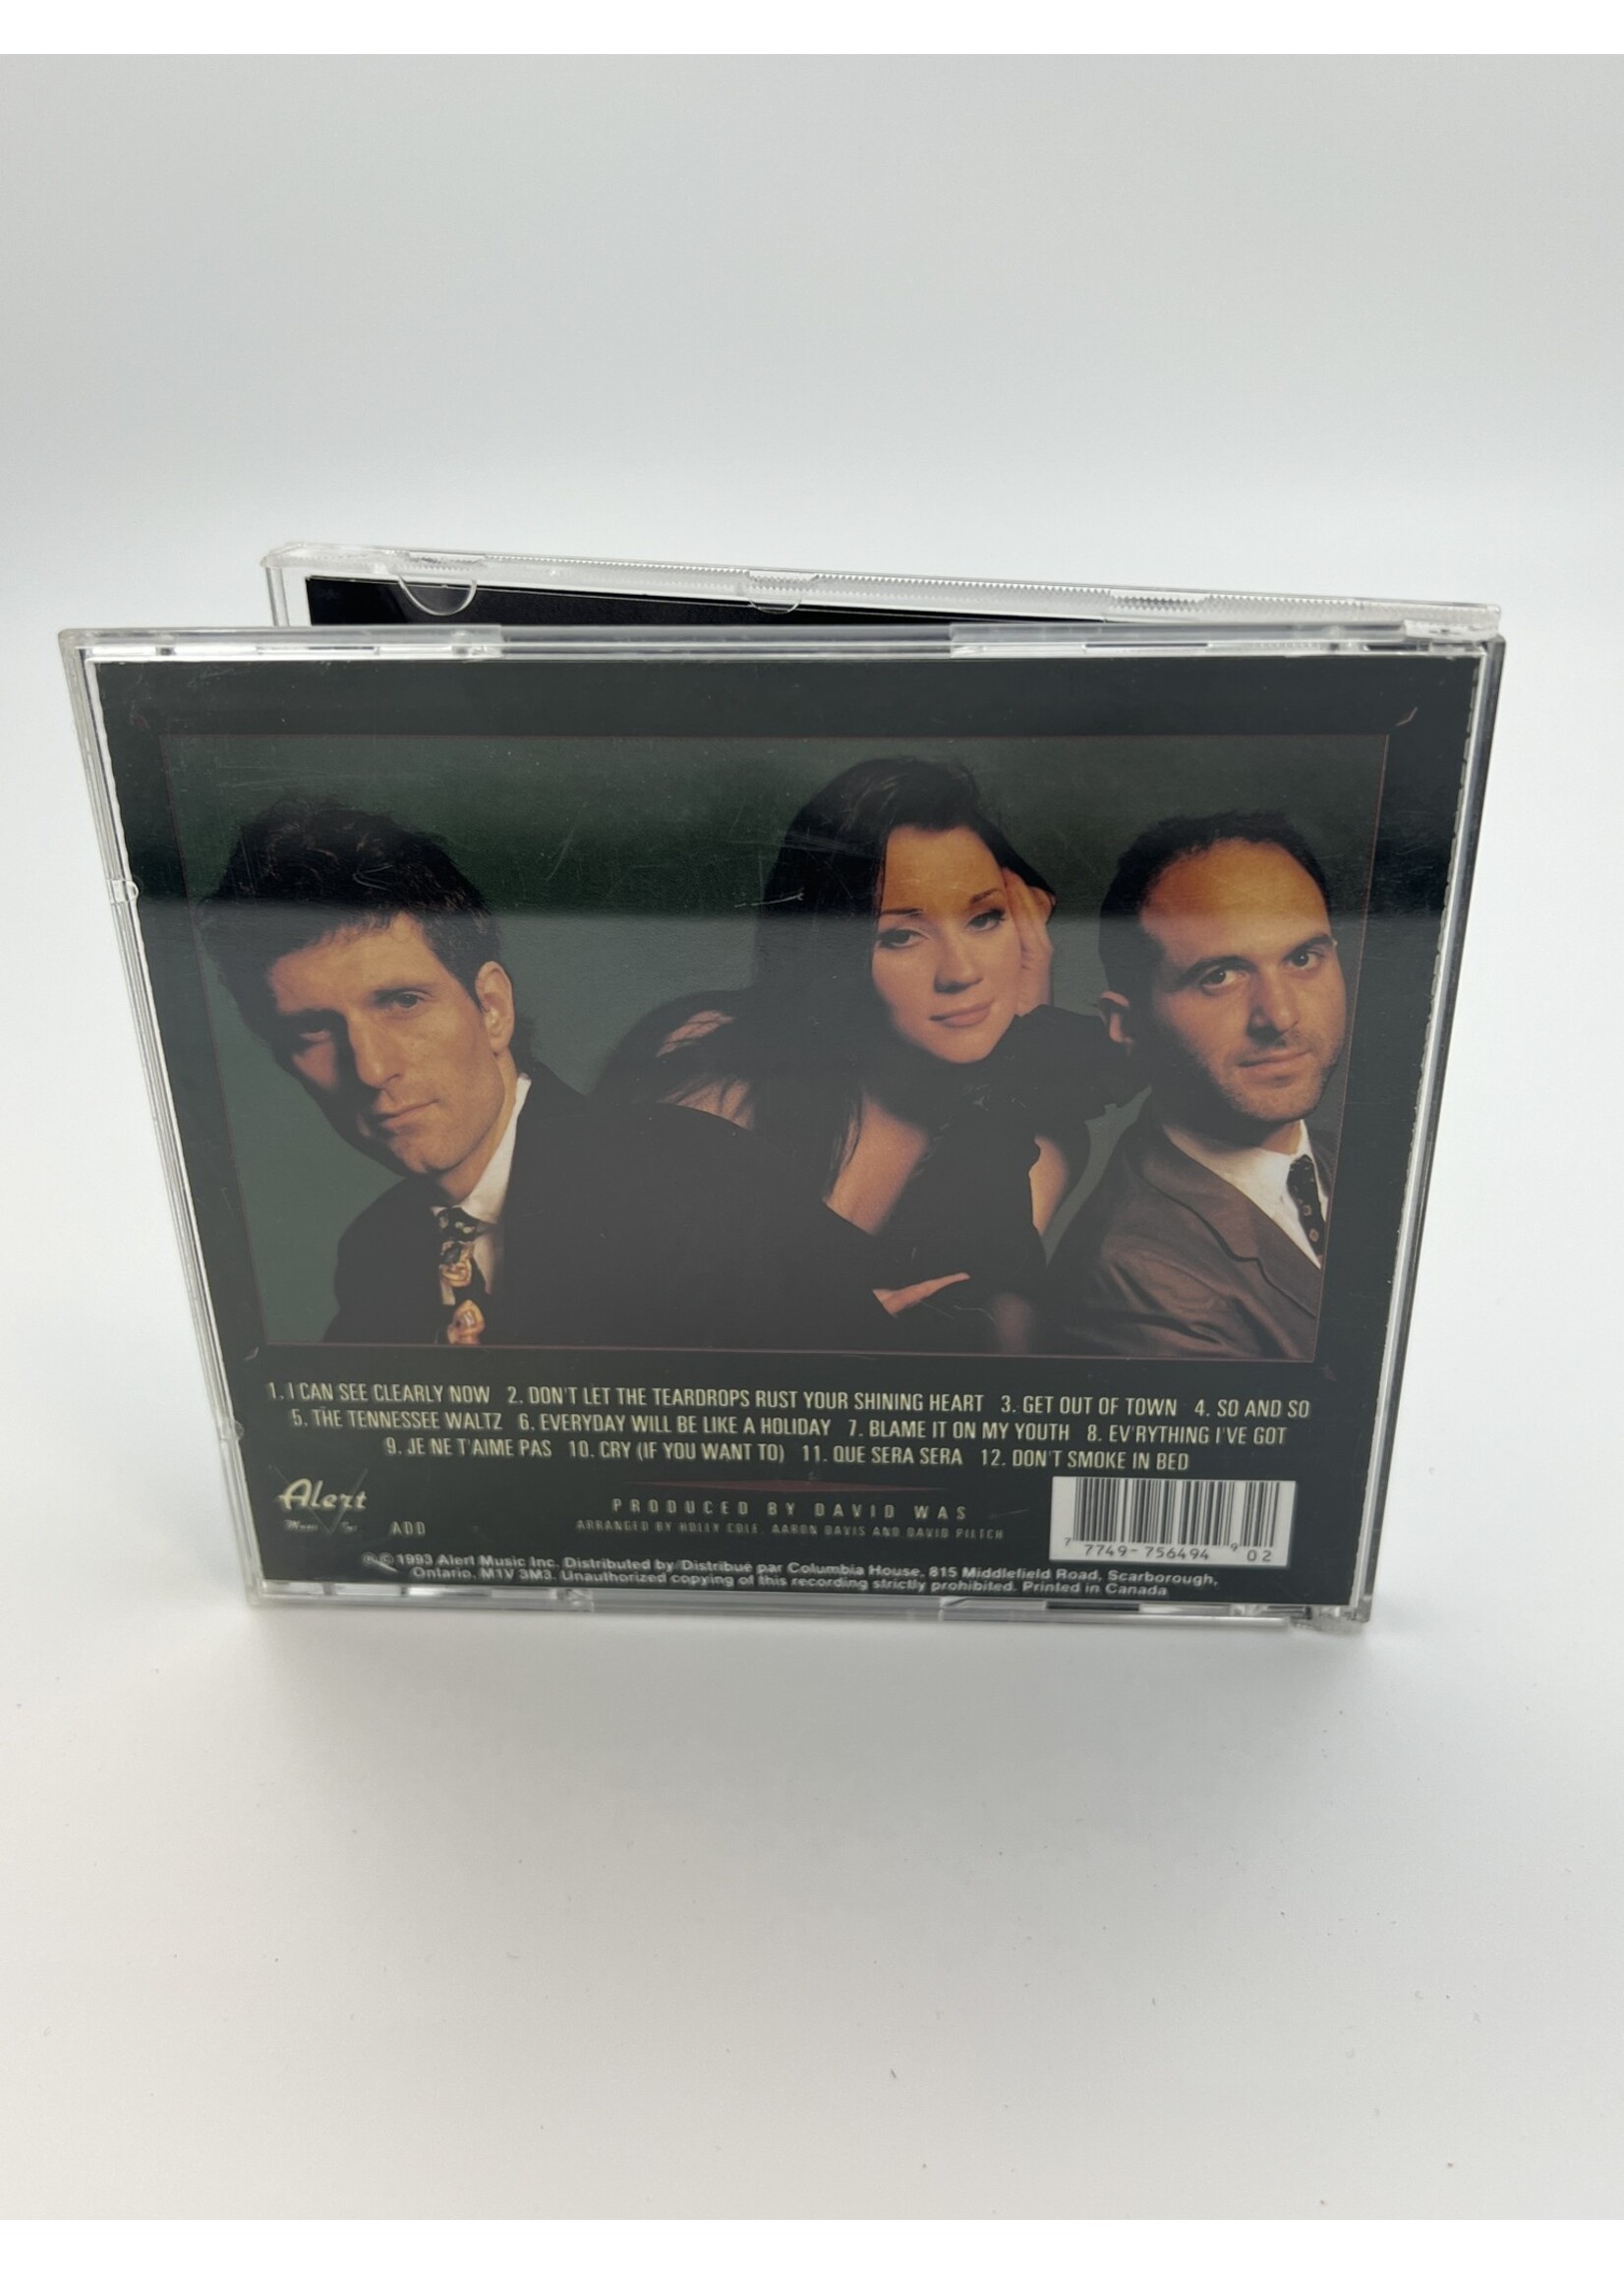 CD Holly Cole Trio Dont Smoke In Bed CD